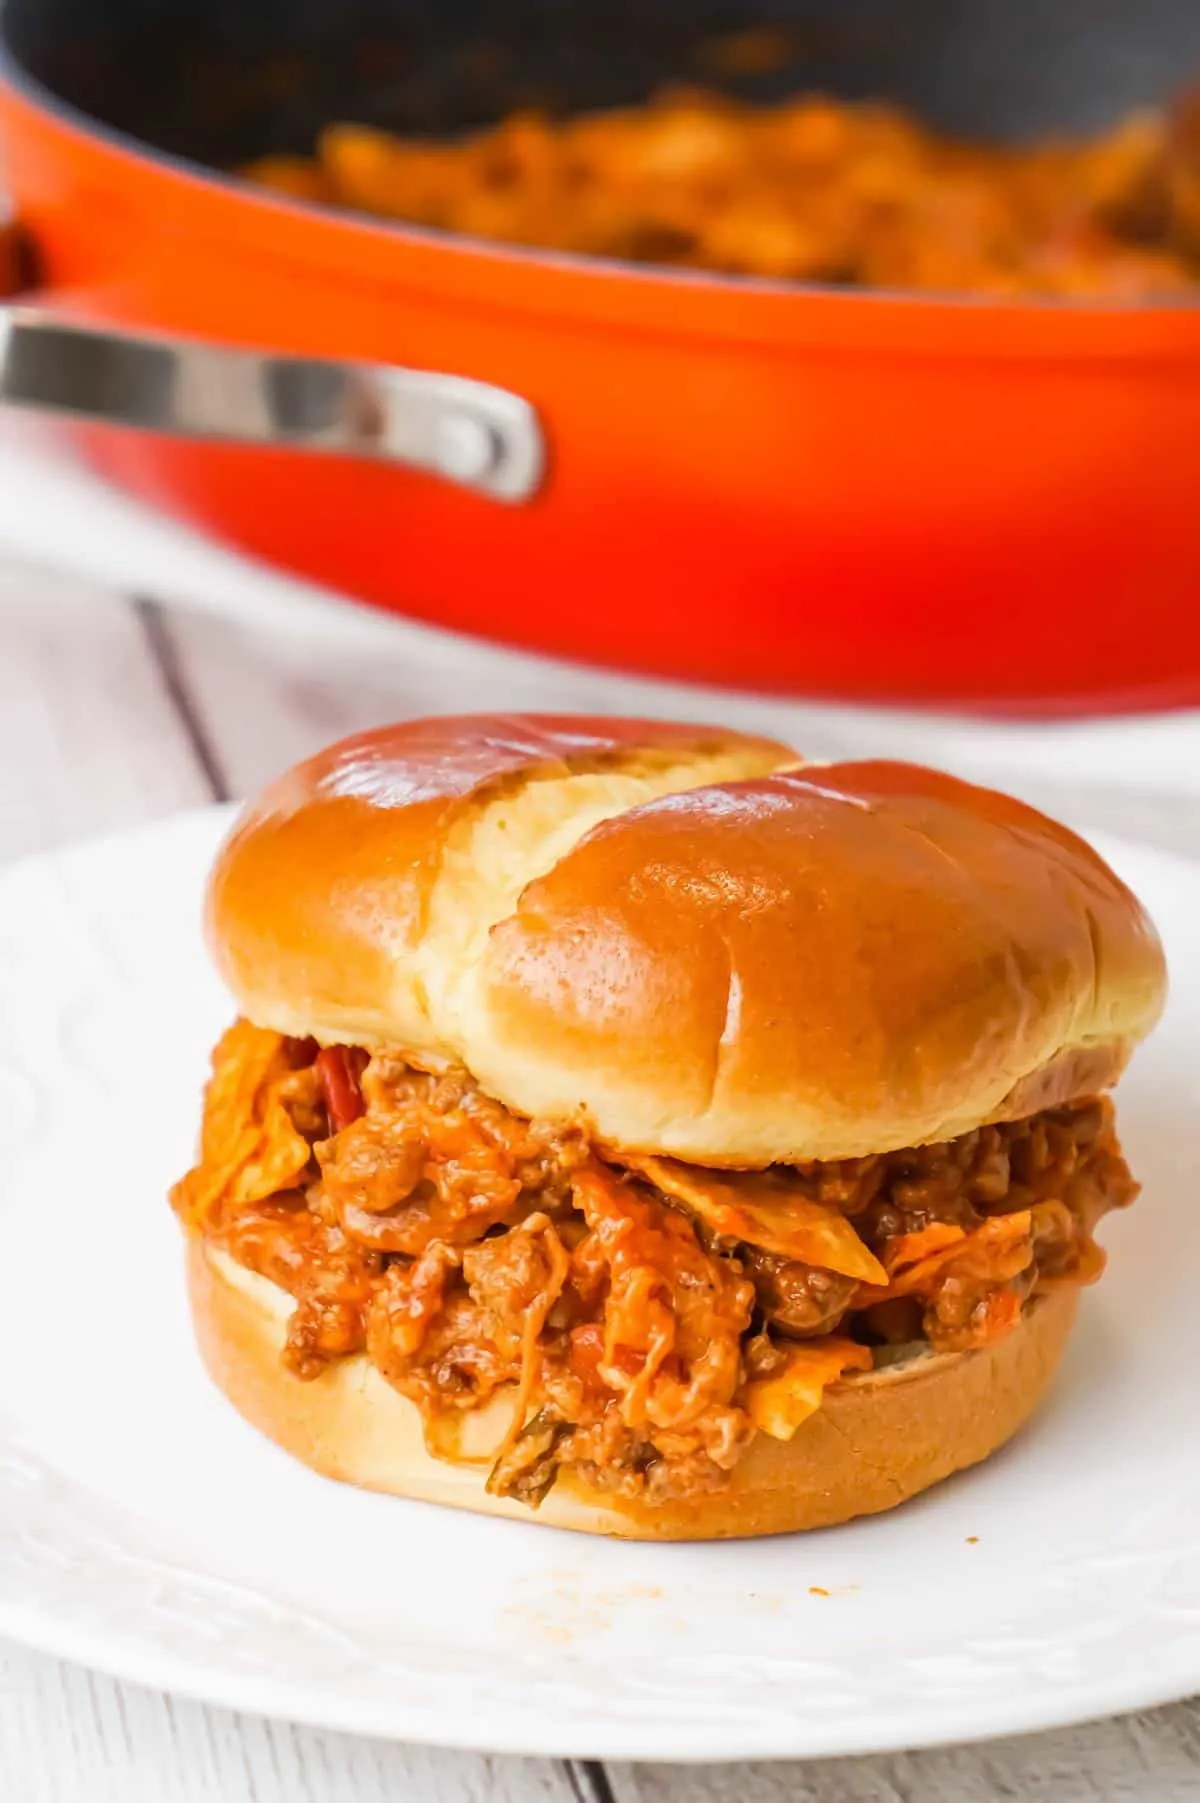 Beef Nacho Sloppy Joes is an easy ground beef dinner recipe loaded with taco seasoning, salsa, chili sauce, crumbled nacho chips and shredded cheese.